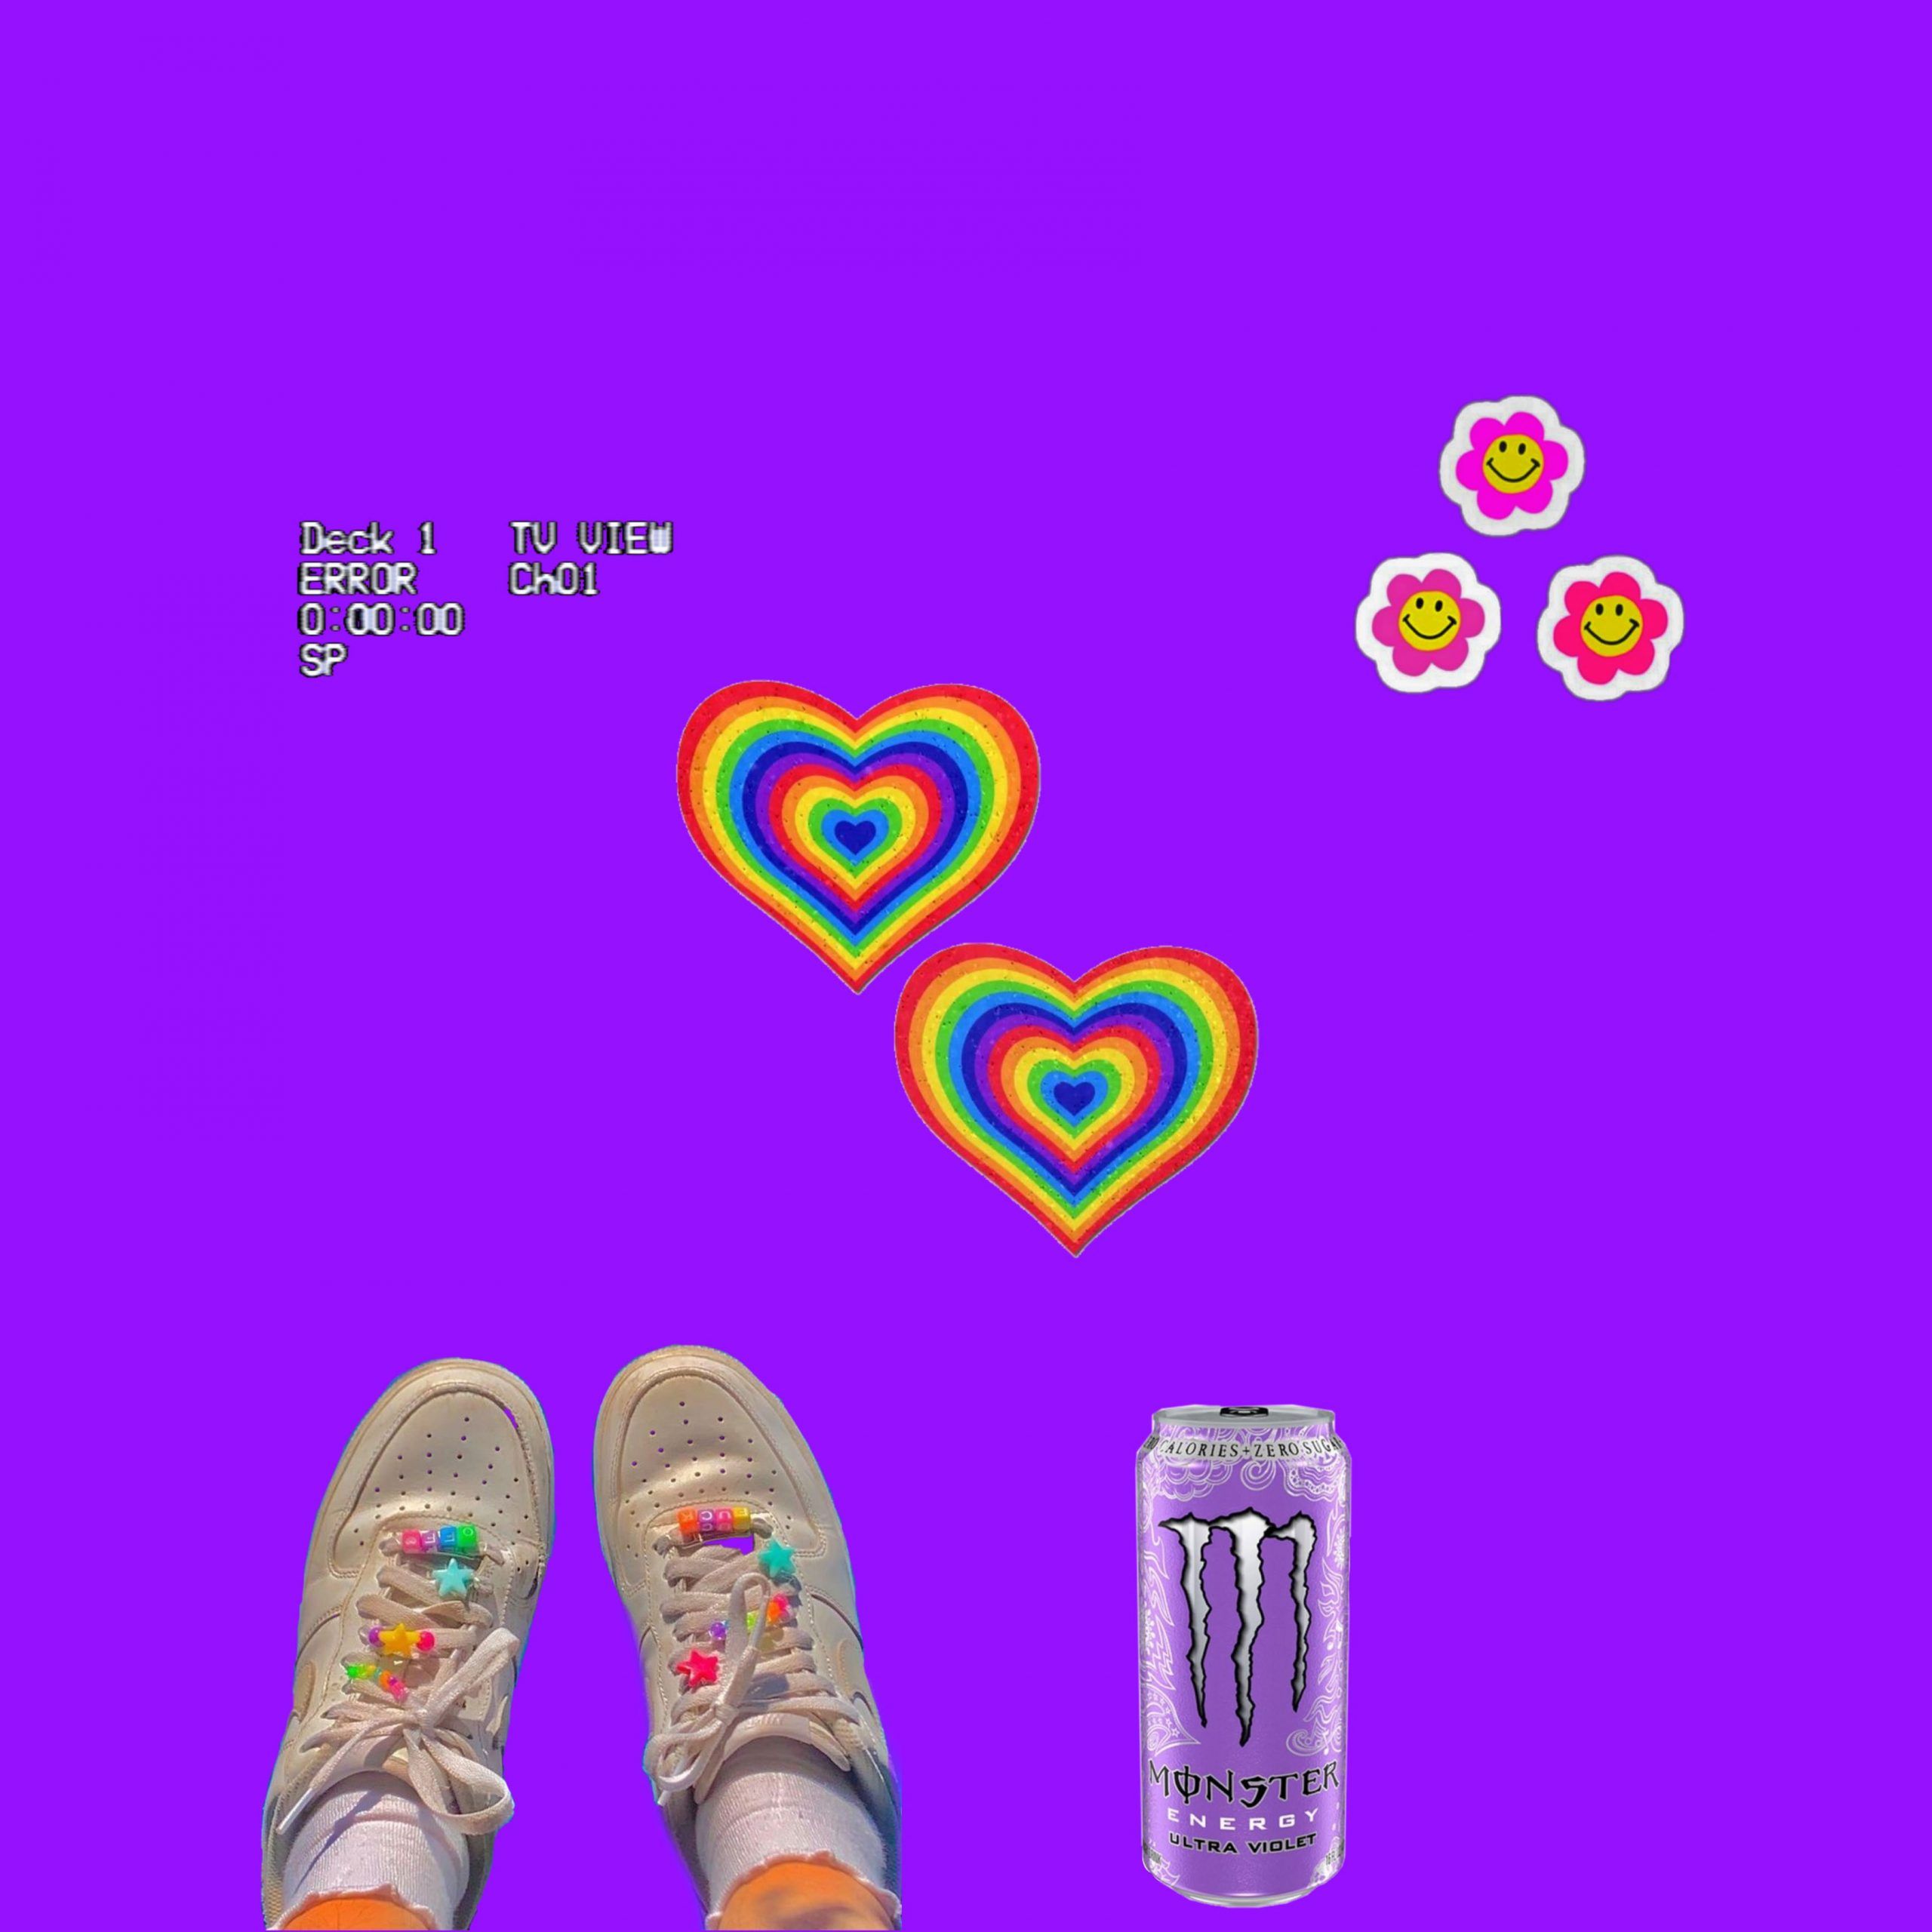 A pair of white shoes with rainbow heart and flower stickers on them. - Indie